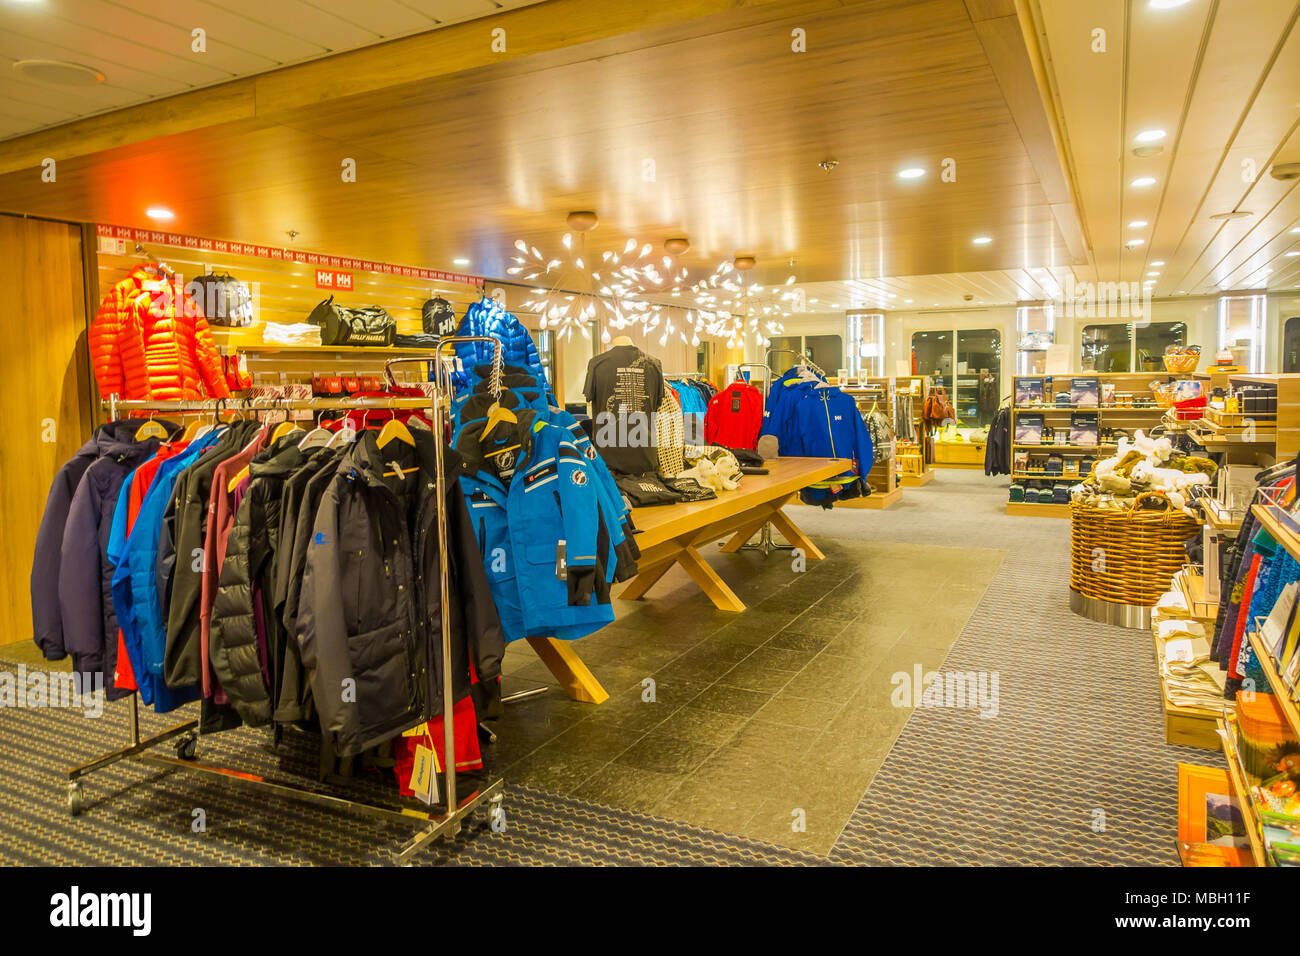 ALESUND, NORWAY - APRIL 04, 2018: Indoor view of jackets and clothes inside of small store in a KONG HARALD cruise Stock Photo